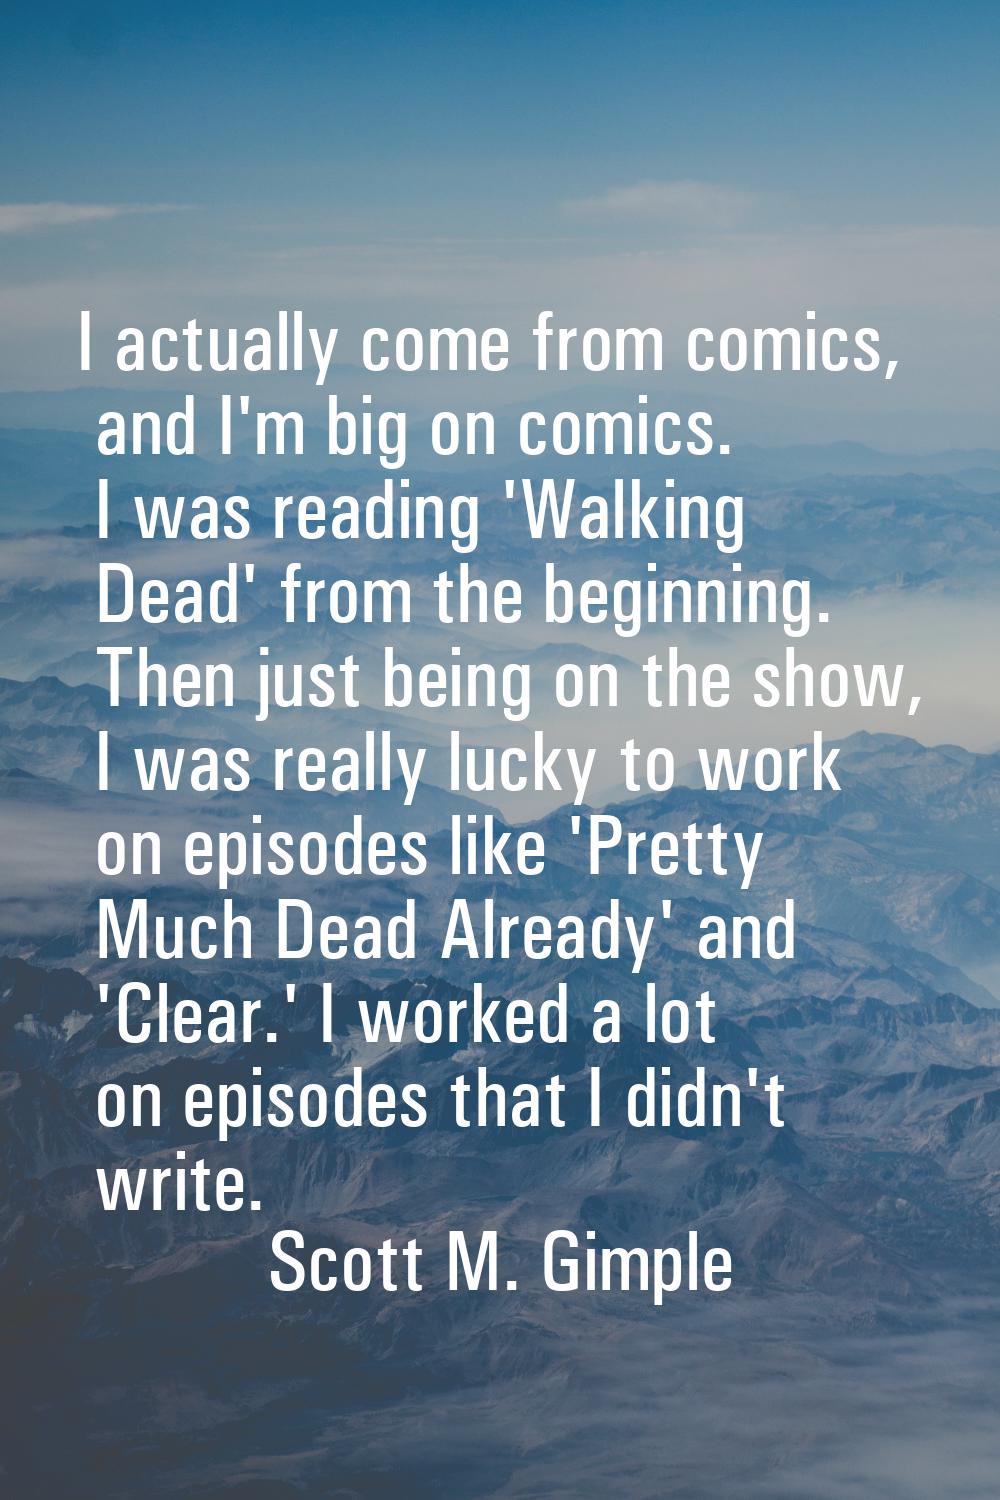 I actually come from comics, and I'm big on comics. I was reading 'Walking Dead' from the beginning